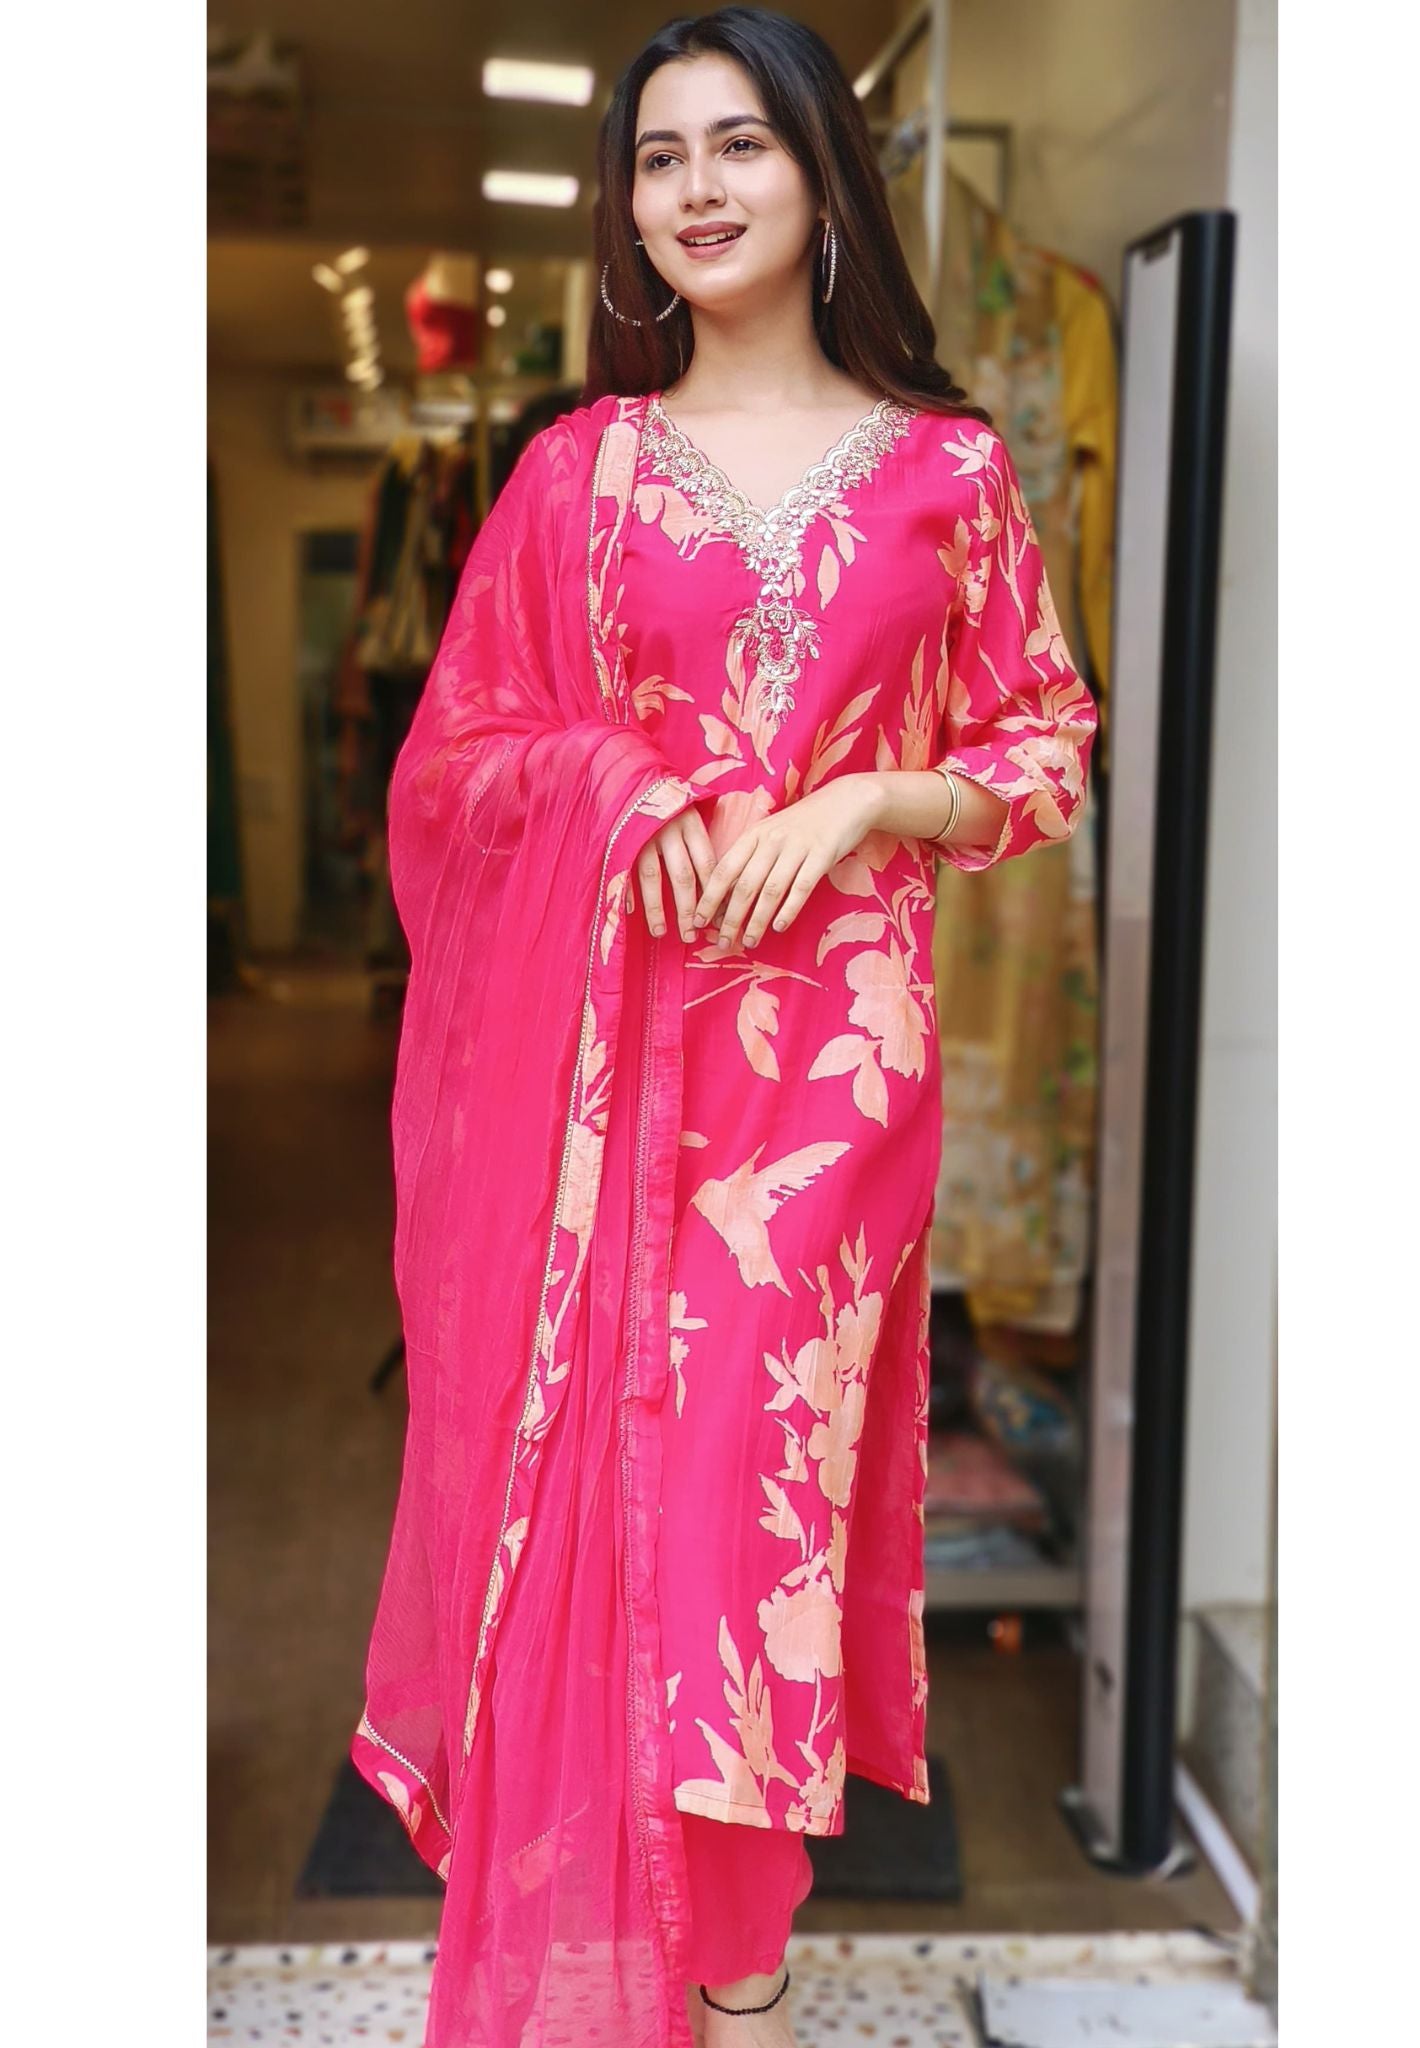 Pearl Embroidered Beautiful Pink Muslin Floral Full Suit Set of 3-04453